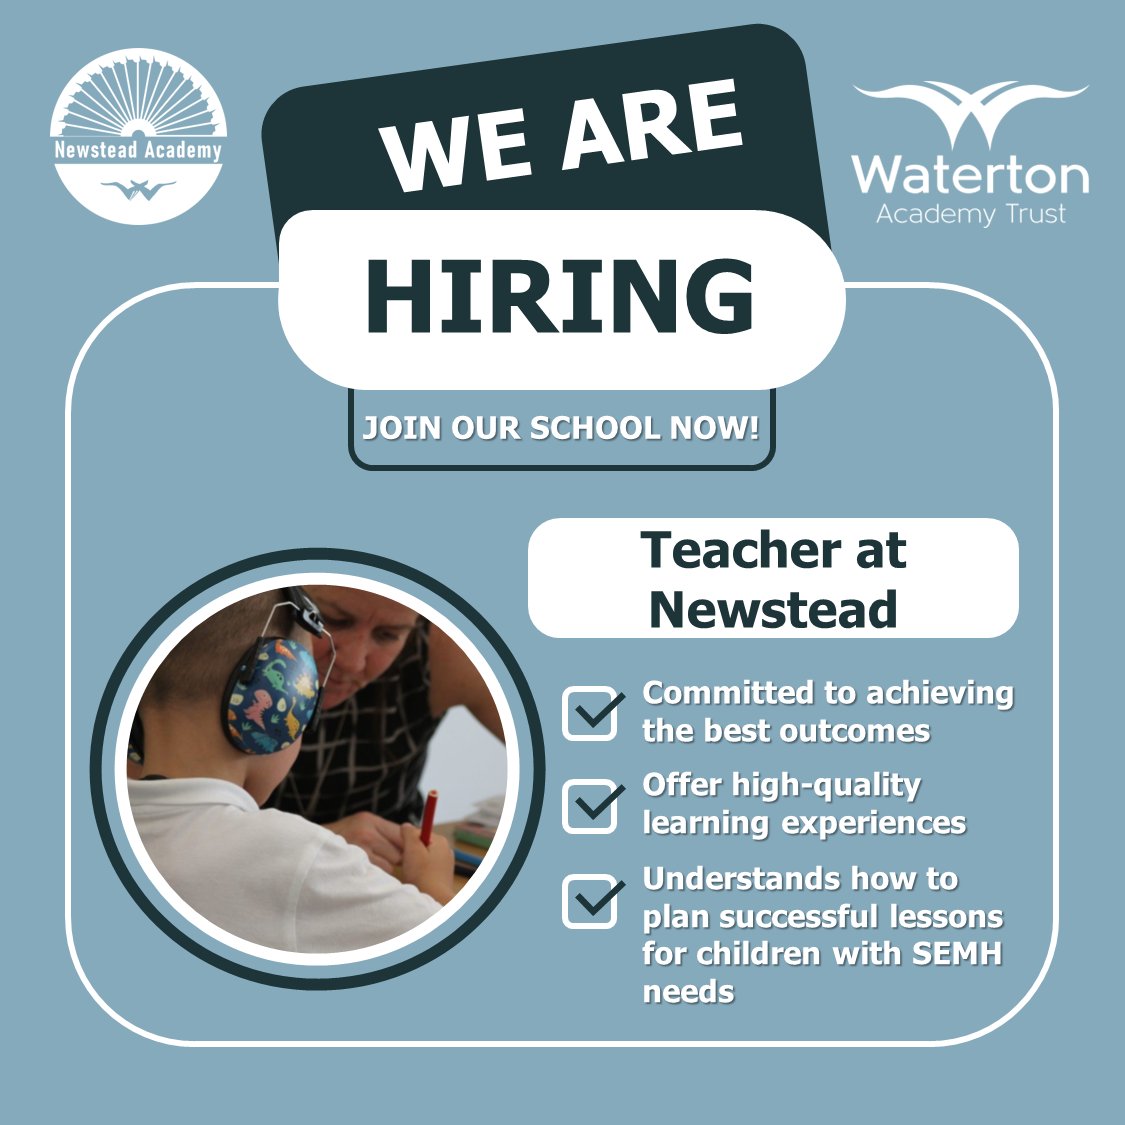 💼Exciting career opportunity available! 🏫@NewsteadAcademy is looking to appoint an ambitious and inspirational teacher 🌟Be part of a team committed to shared success 🔗For more information visit: watertonacademytrust.org/recruitment/ #JoinOurTeam #TeachingJobs